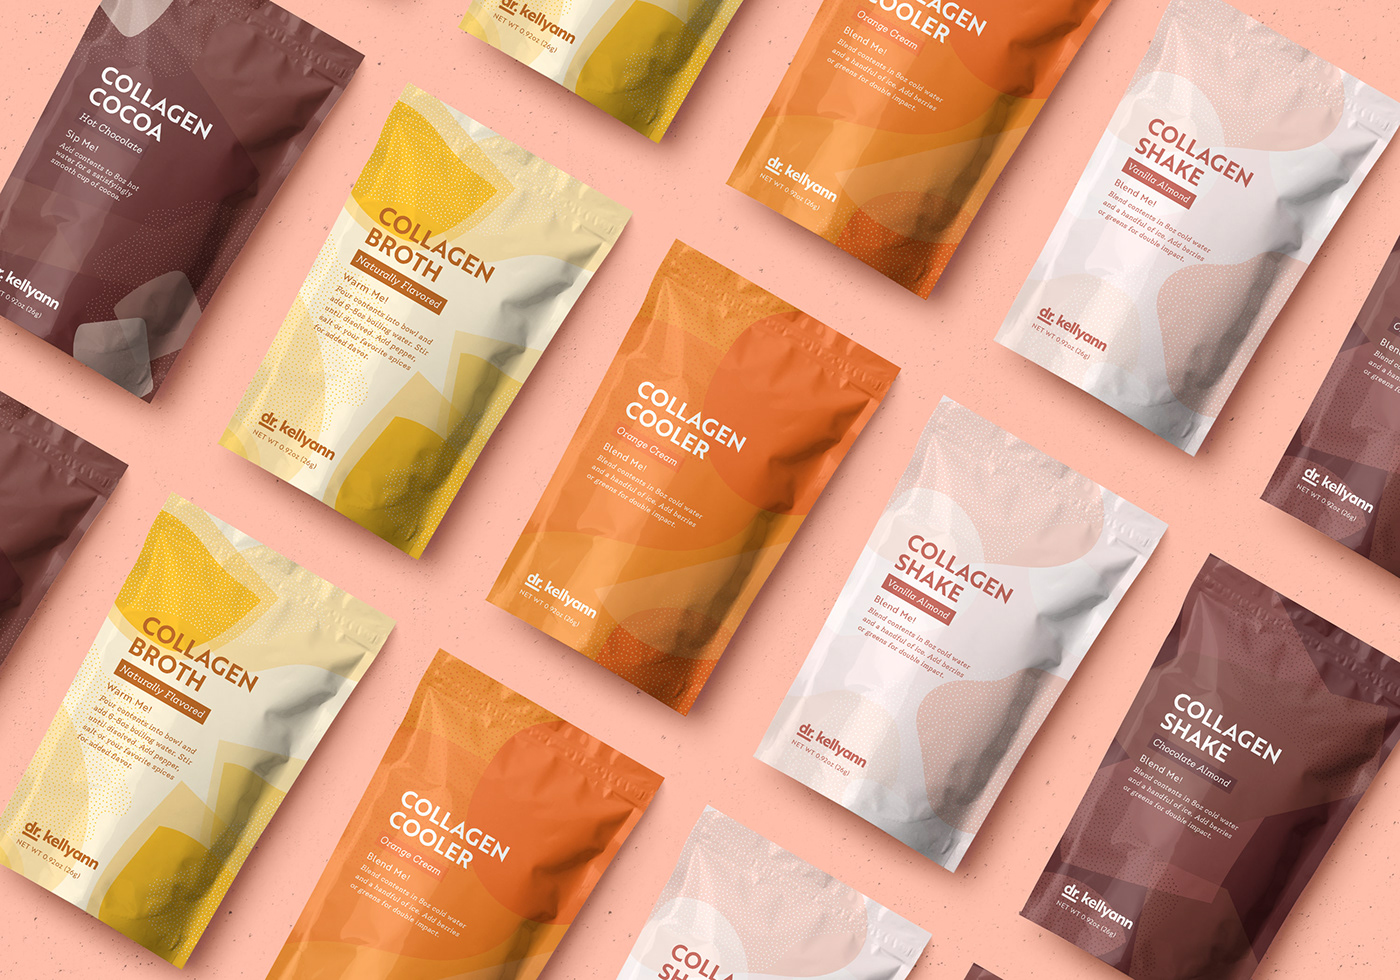 graphic design  Packaging collagen health and wellness colorful Pouches animation  Bone Broth branding  Logo Design